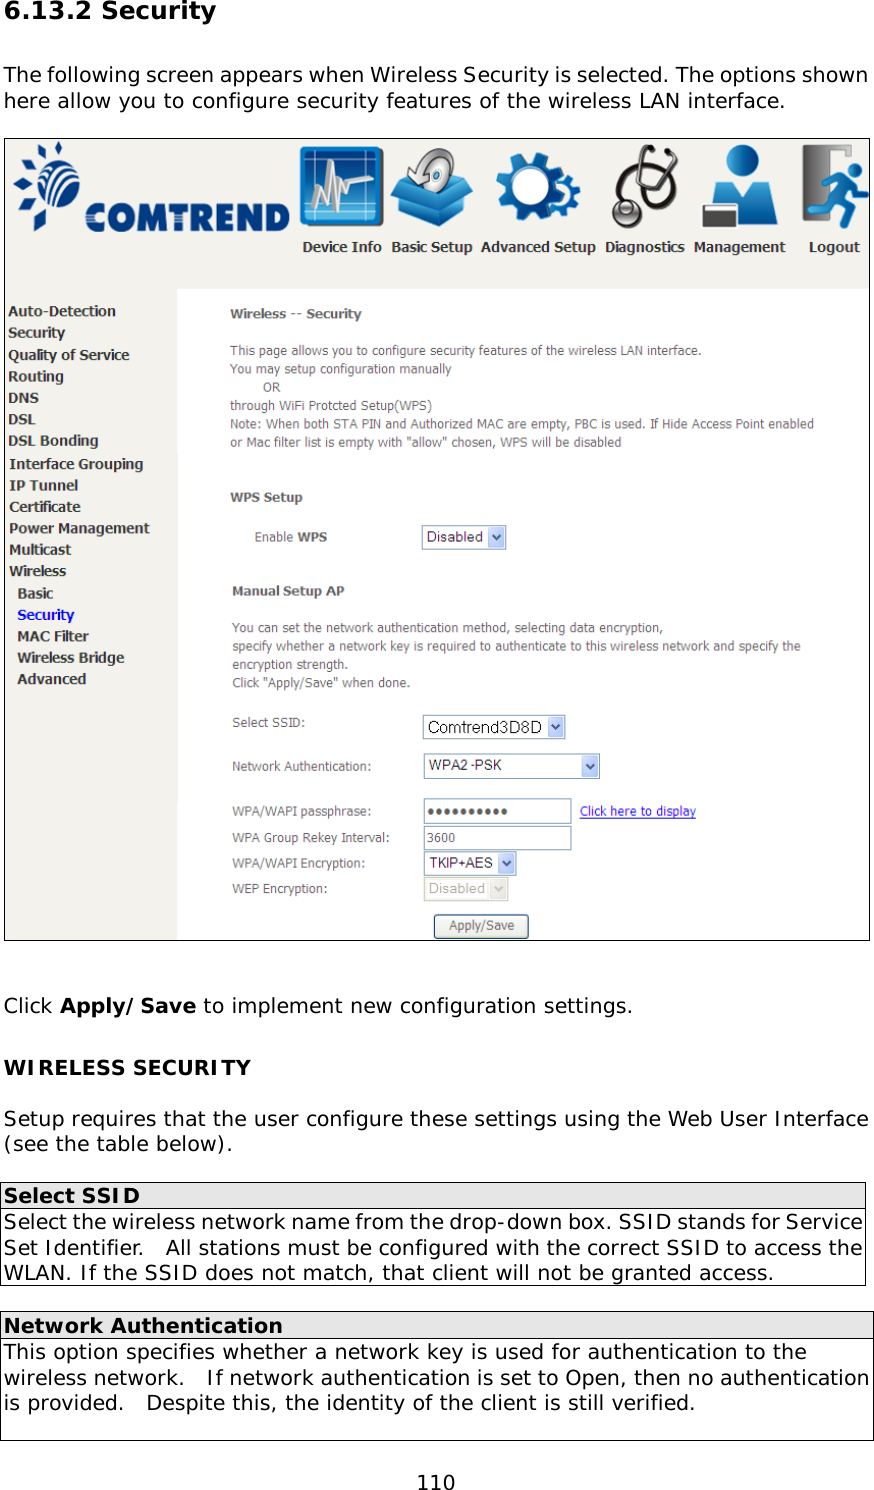  110 6.13.2 Security The following screen appears when Wireless Security is selected. The options shown here allow you to configure security features of the wireless LAN interface.     Click Apply/Save to implement new configuration settings. WIRELESS SECURITY  Setup requires that the user configure these settings using the Web User Interface (see the table below).    Select SSID Select the wireless network name from the drop-down box. SSID stands for Service Set Identifier.  All stations must be configured with the correct SSID to access the WLAN. If the SSID does not match, that client will not be granted access.  Network Authentication This option specifies whether a network key is used for authentication to the wireless network.  If network authentication is set to Open, then no authentication is provided.  Despite this, the identity of the client is still verified.    